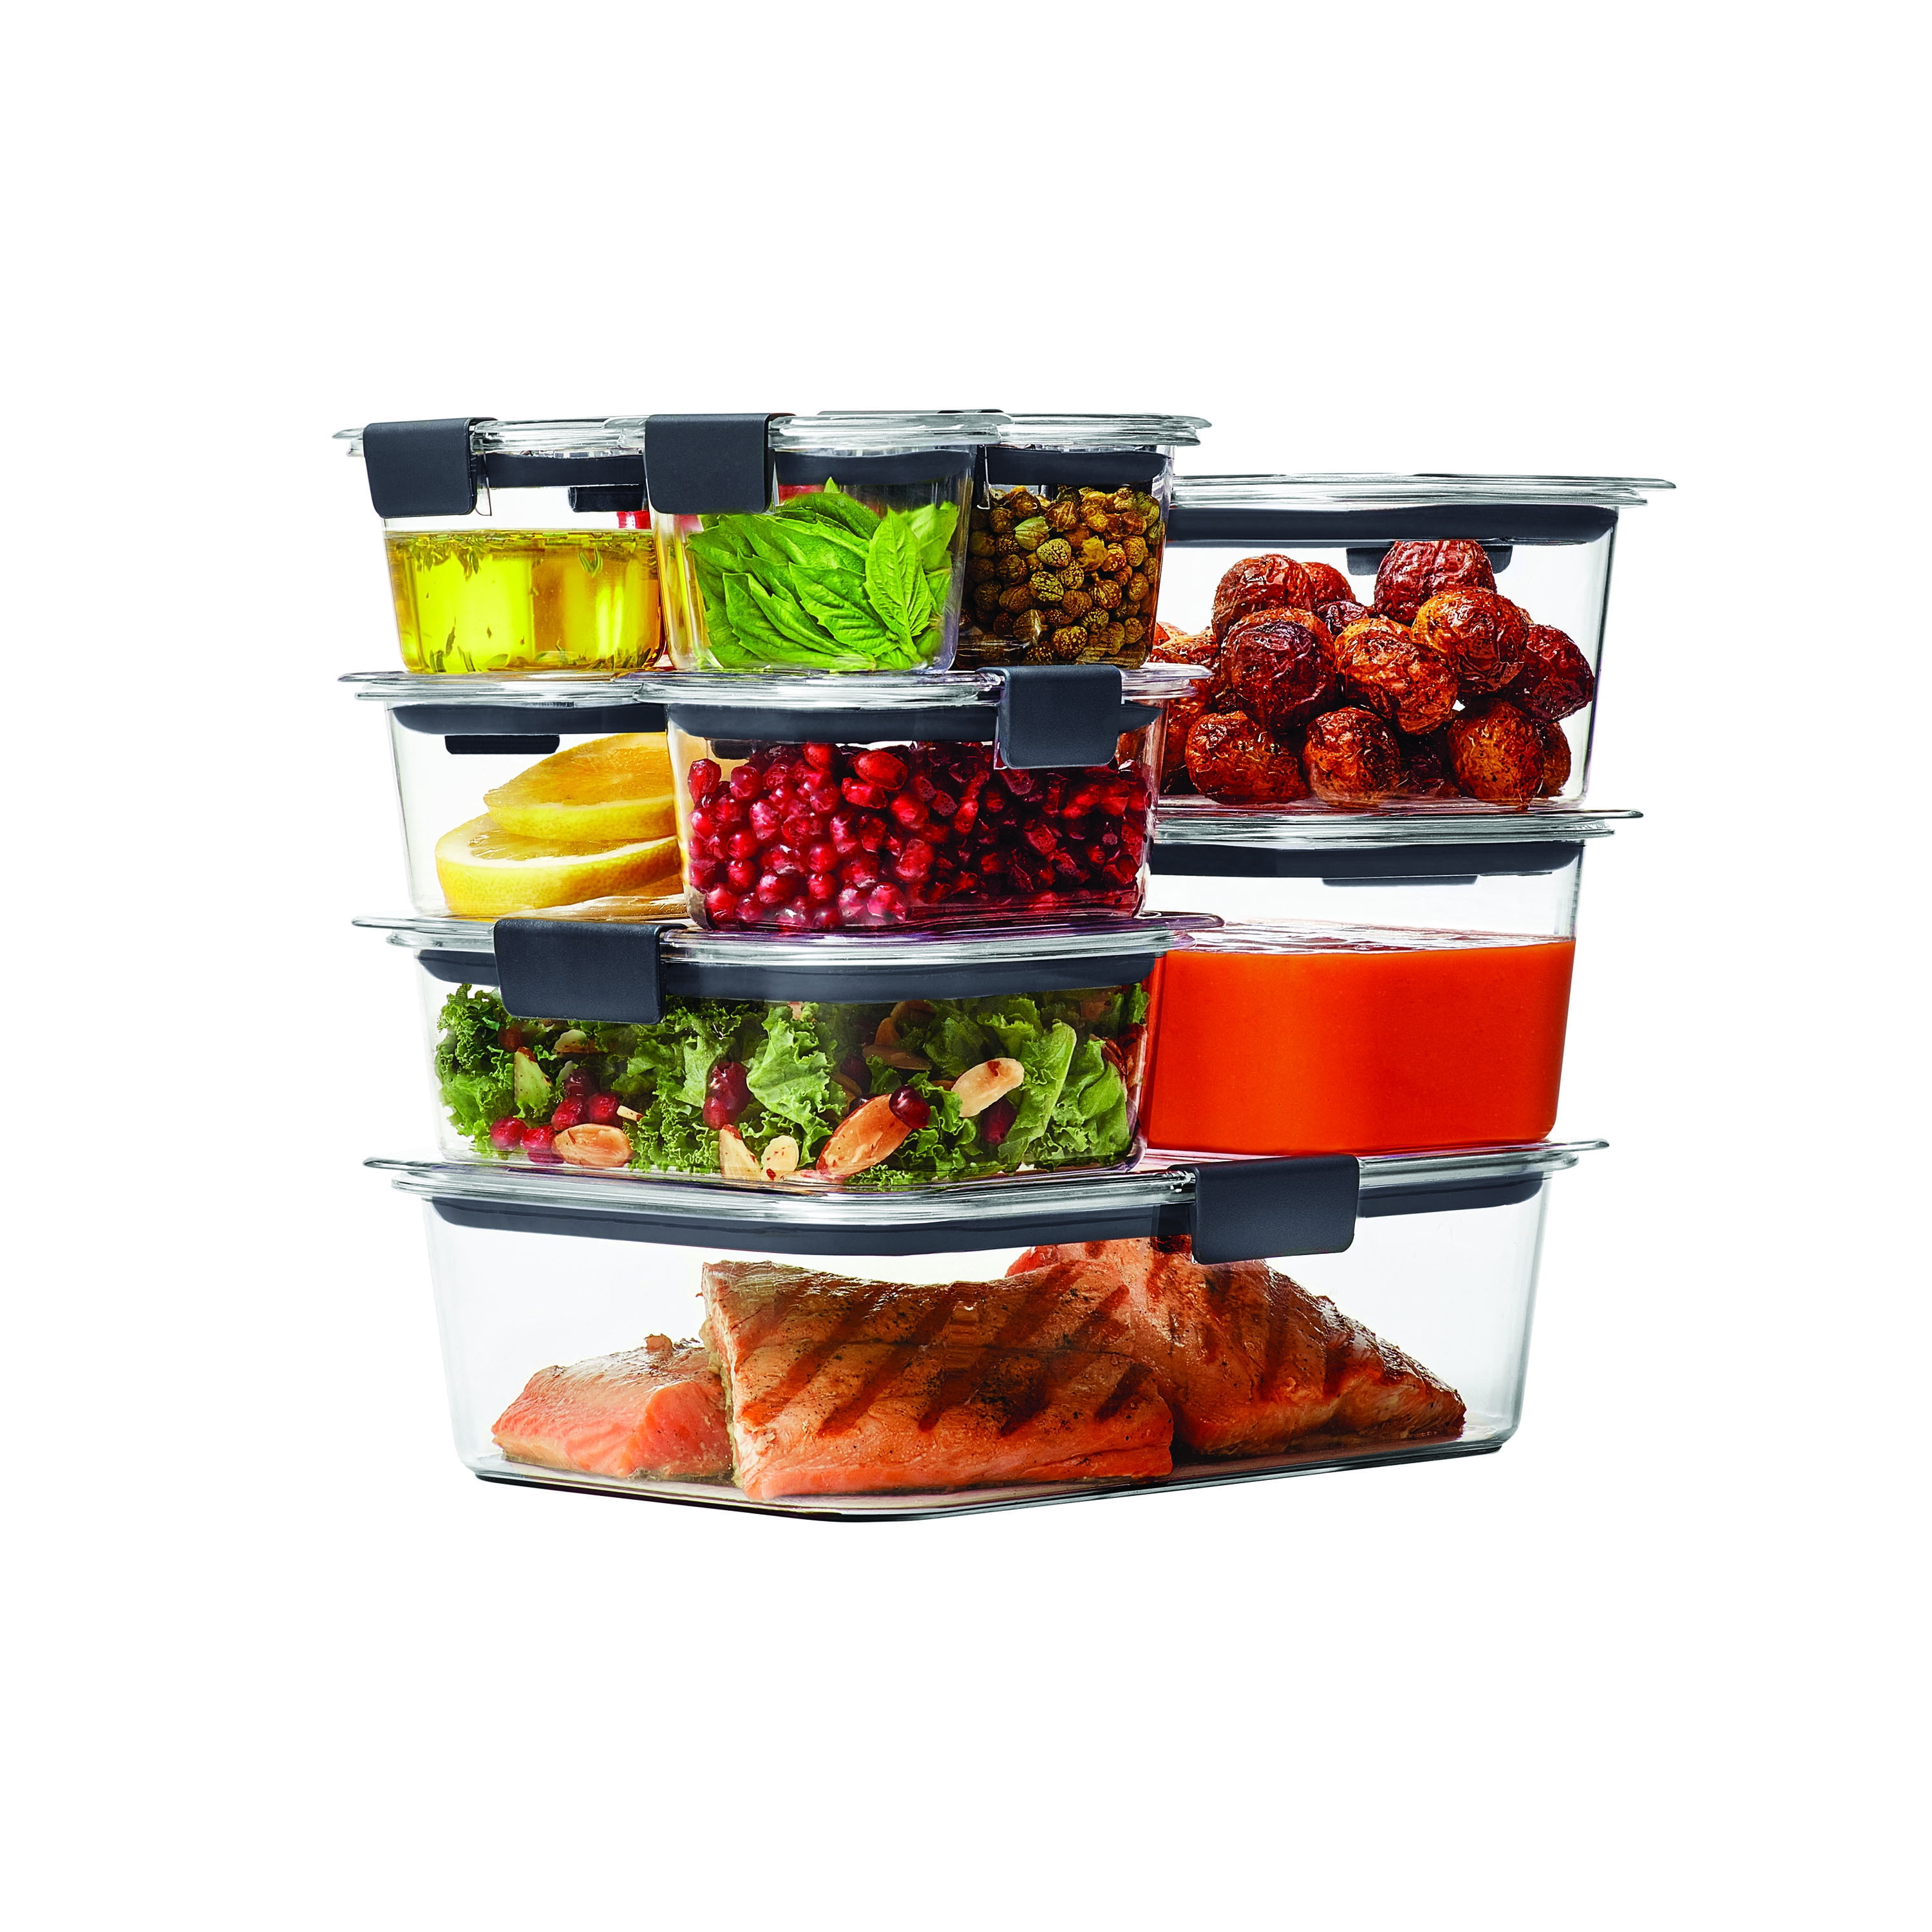 Rubbermaid Brilliance Food Storage Container, 20 Piece Set, New, Open Box